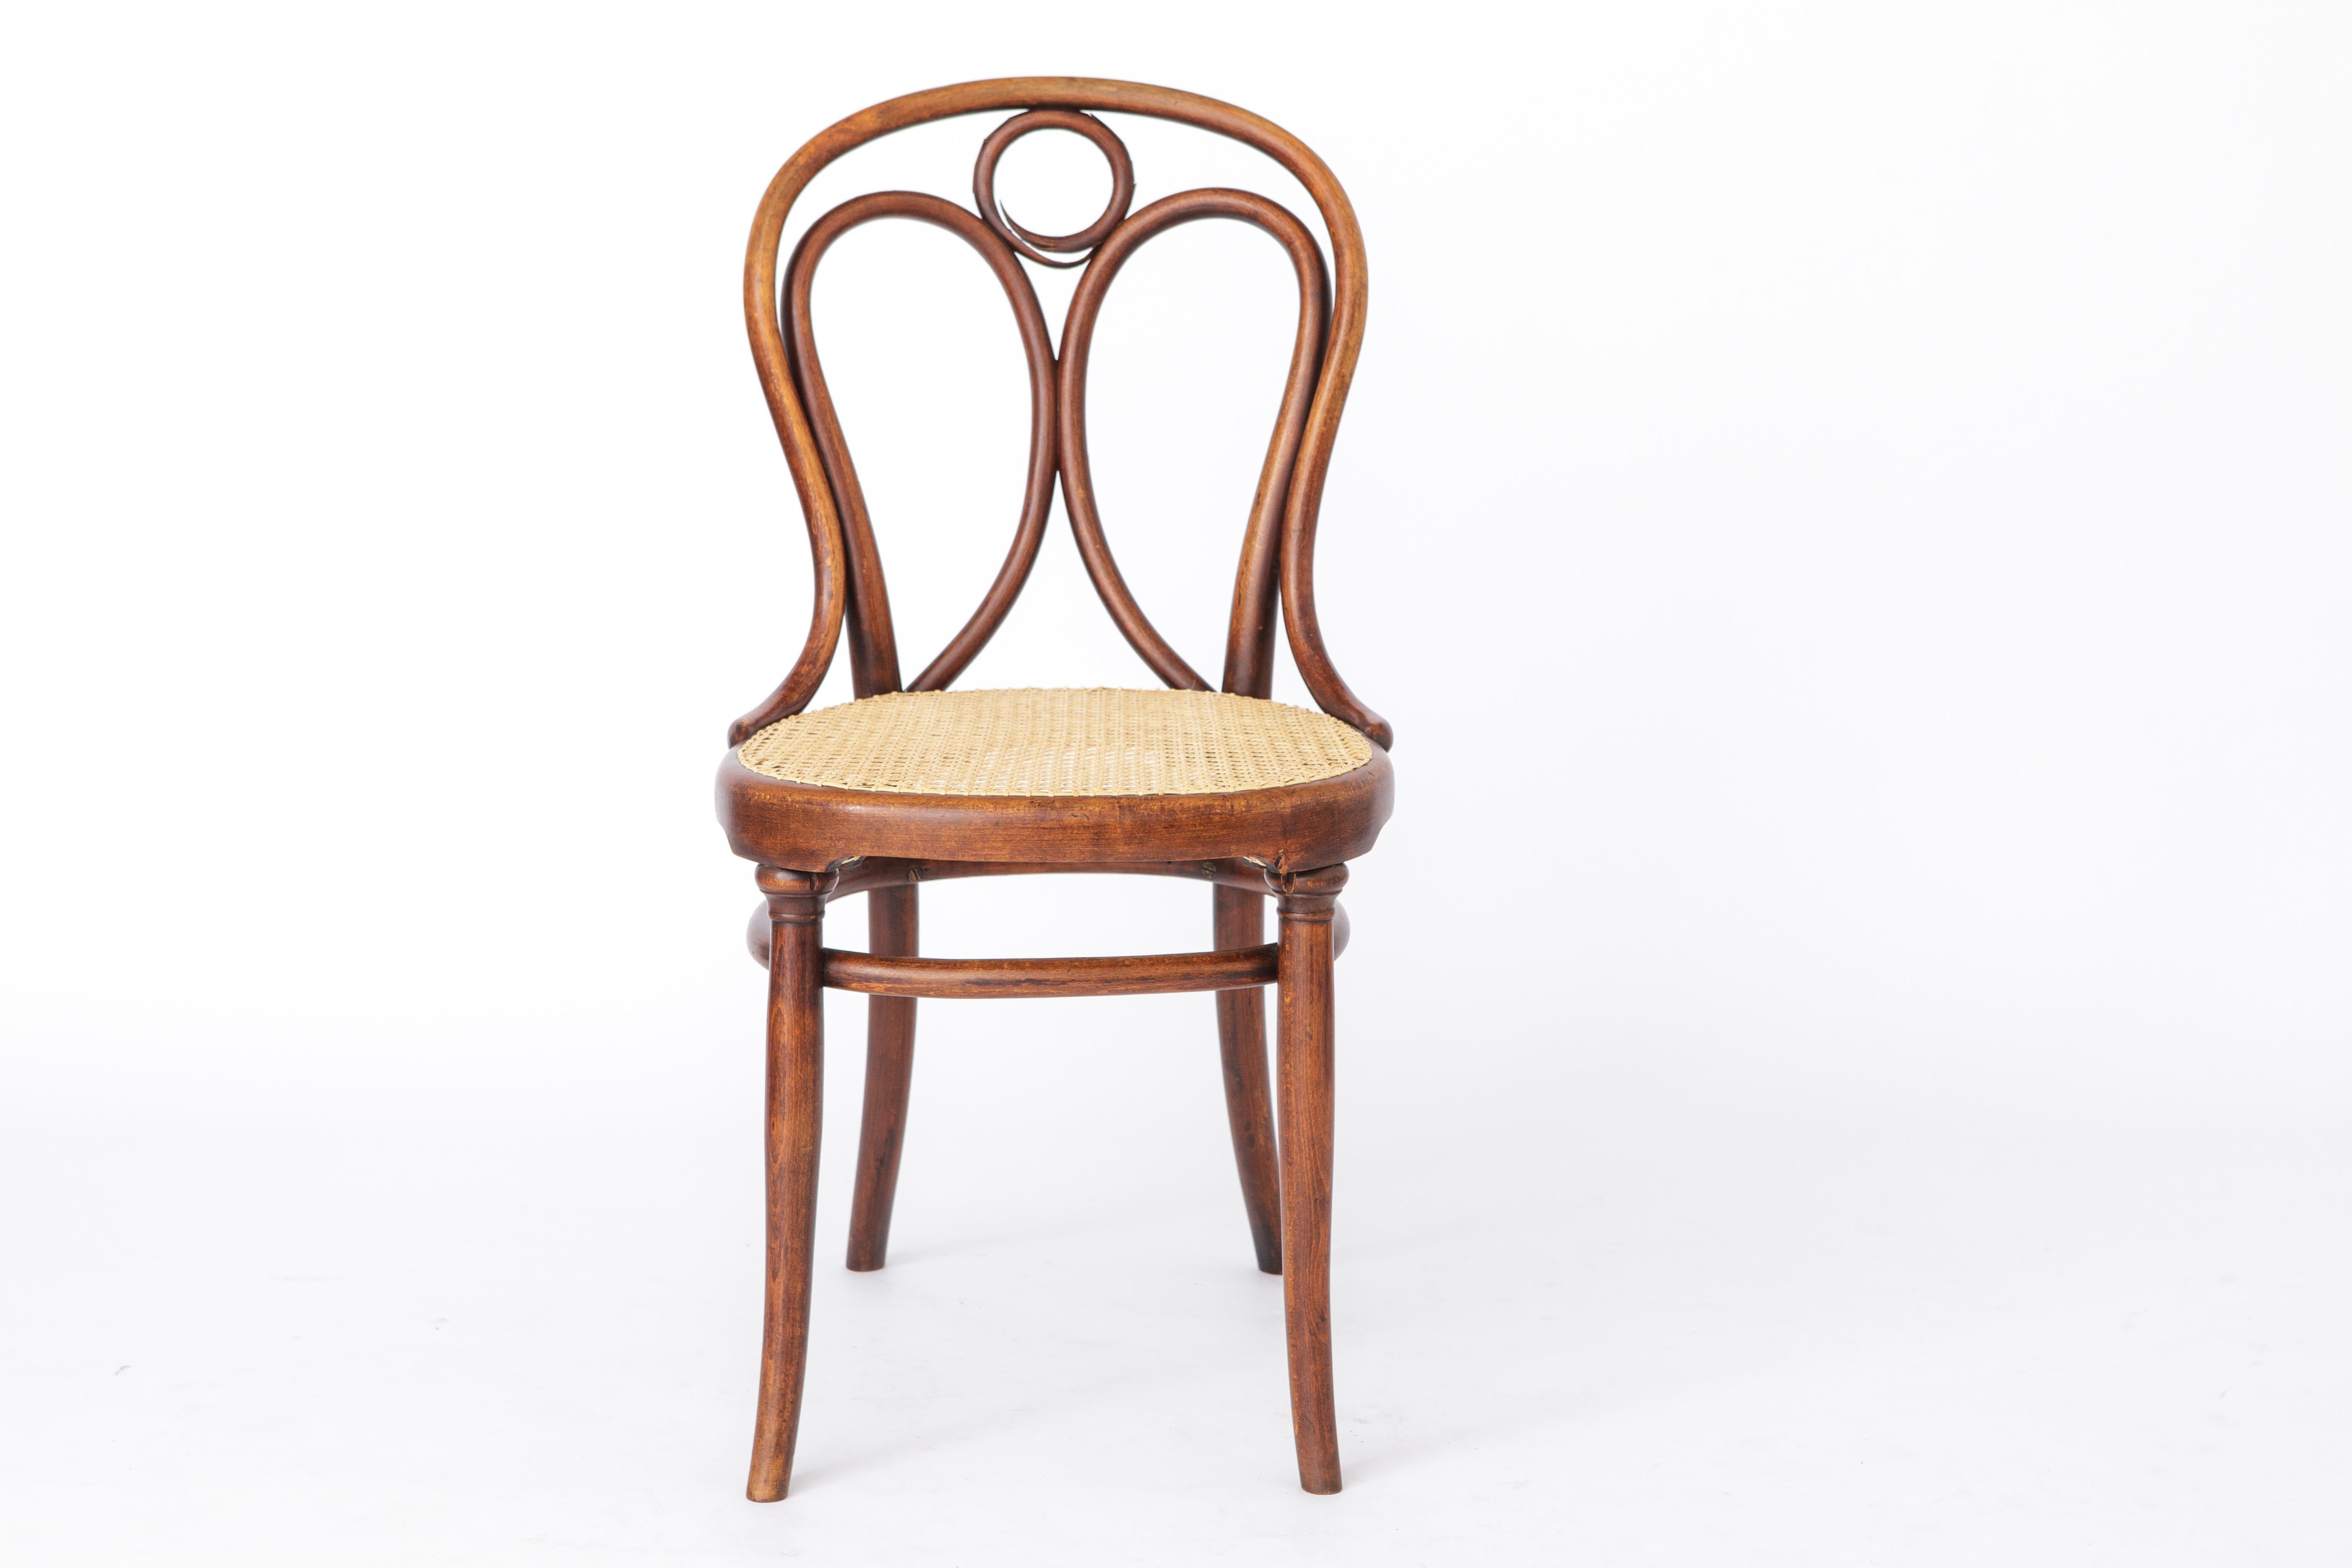 Pair of ancient Thonet chairs from the end of 19th Century. 
Model no. 18 and 19. Design from 1880s. 
Displayed price is for both chairs

Sturdy chair frames. Dyed beech bentwood. 
Stable stand. No wobbling connections. 
Renewed Viennese handwoven